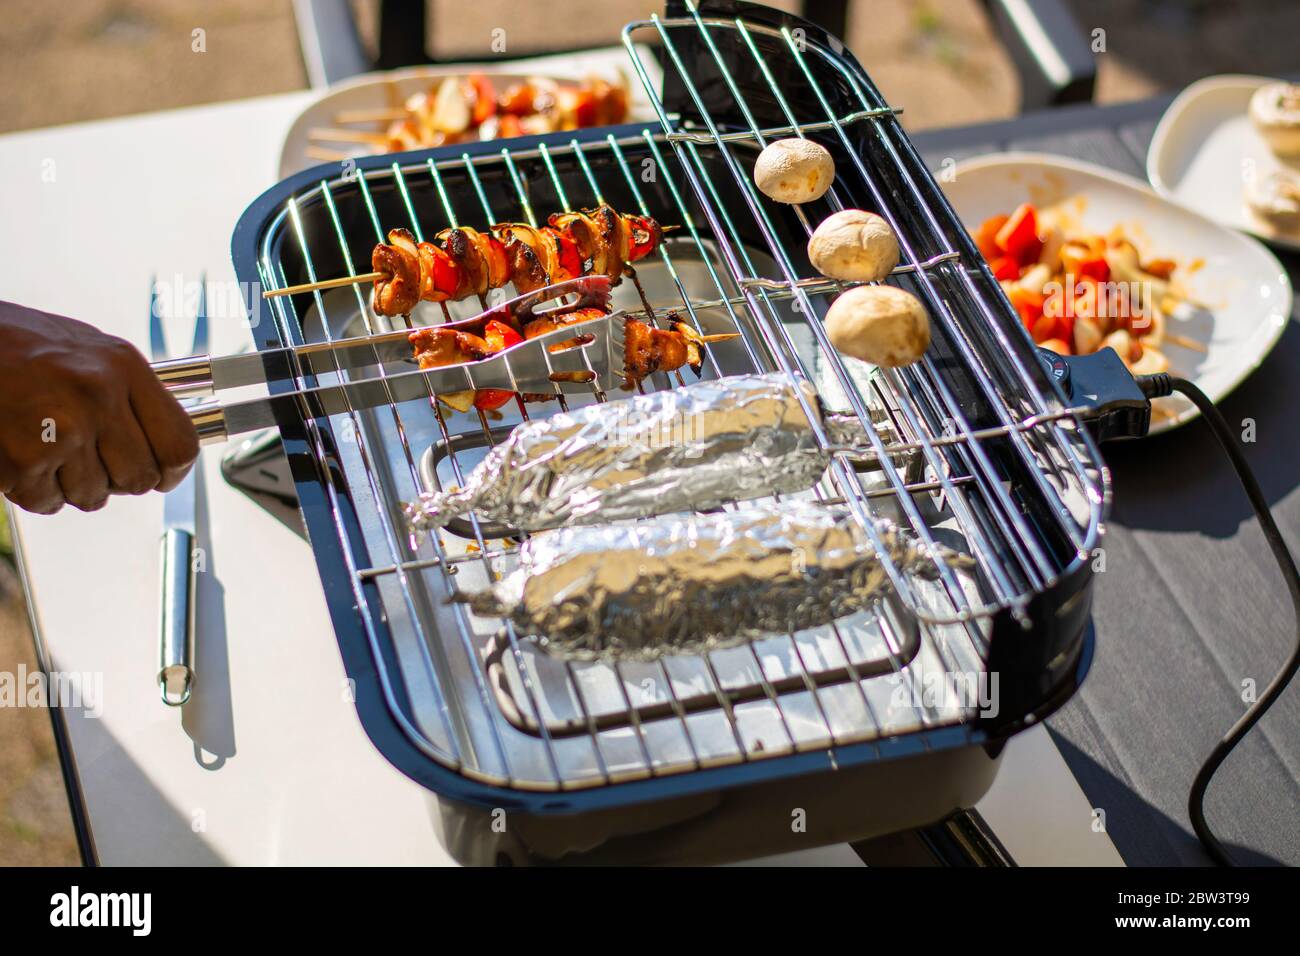 Grilling on a hybrid grill barbecue for electric or charcoal. Marinated raw chicken skewers on wooden skewers with bell pepper and onion Stock Photo